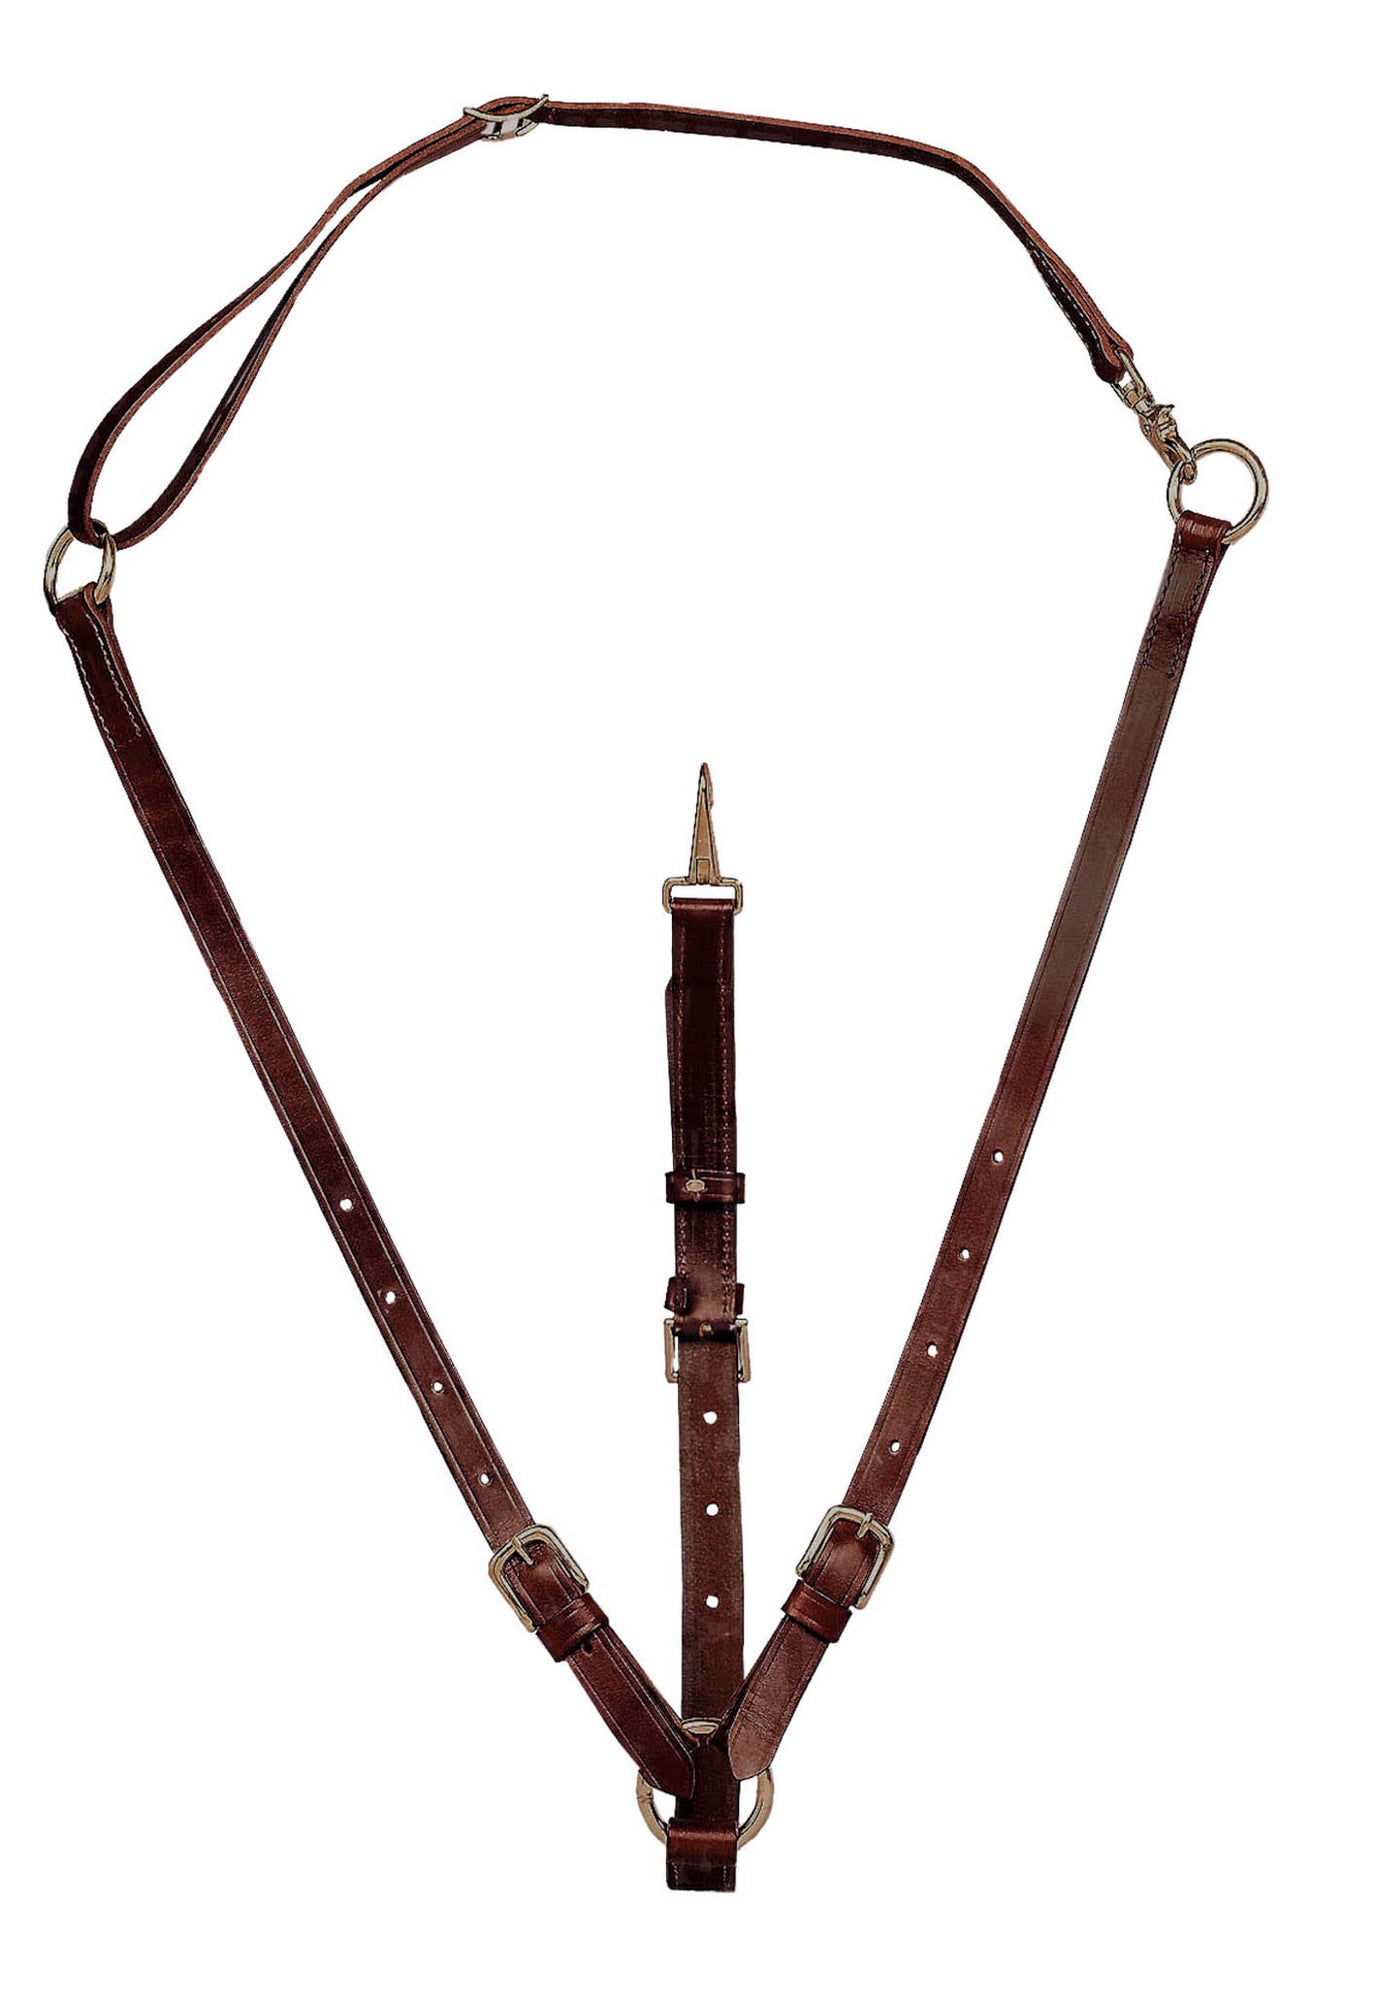 Tory Leather Adjustable Training Martingale With Neck Strap